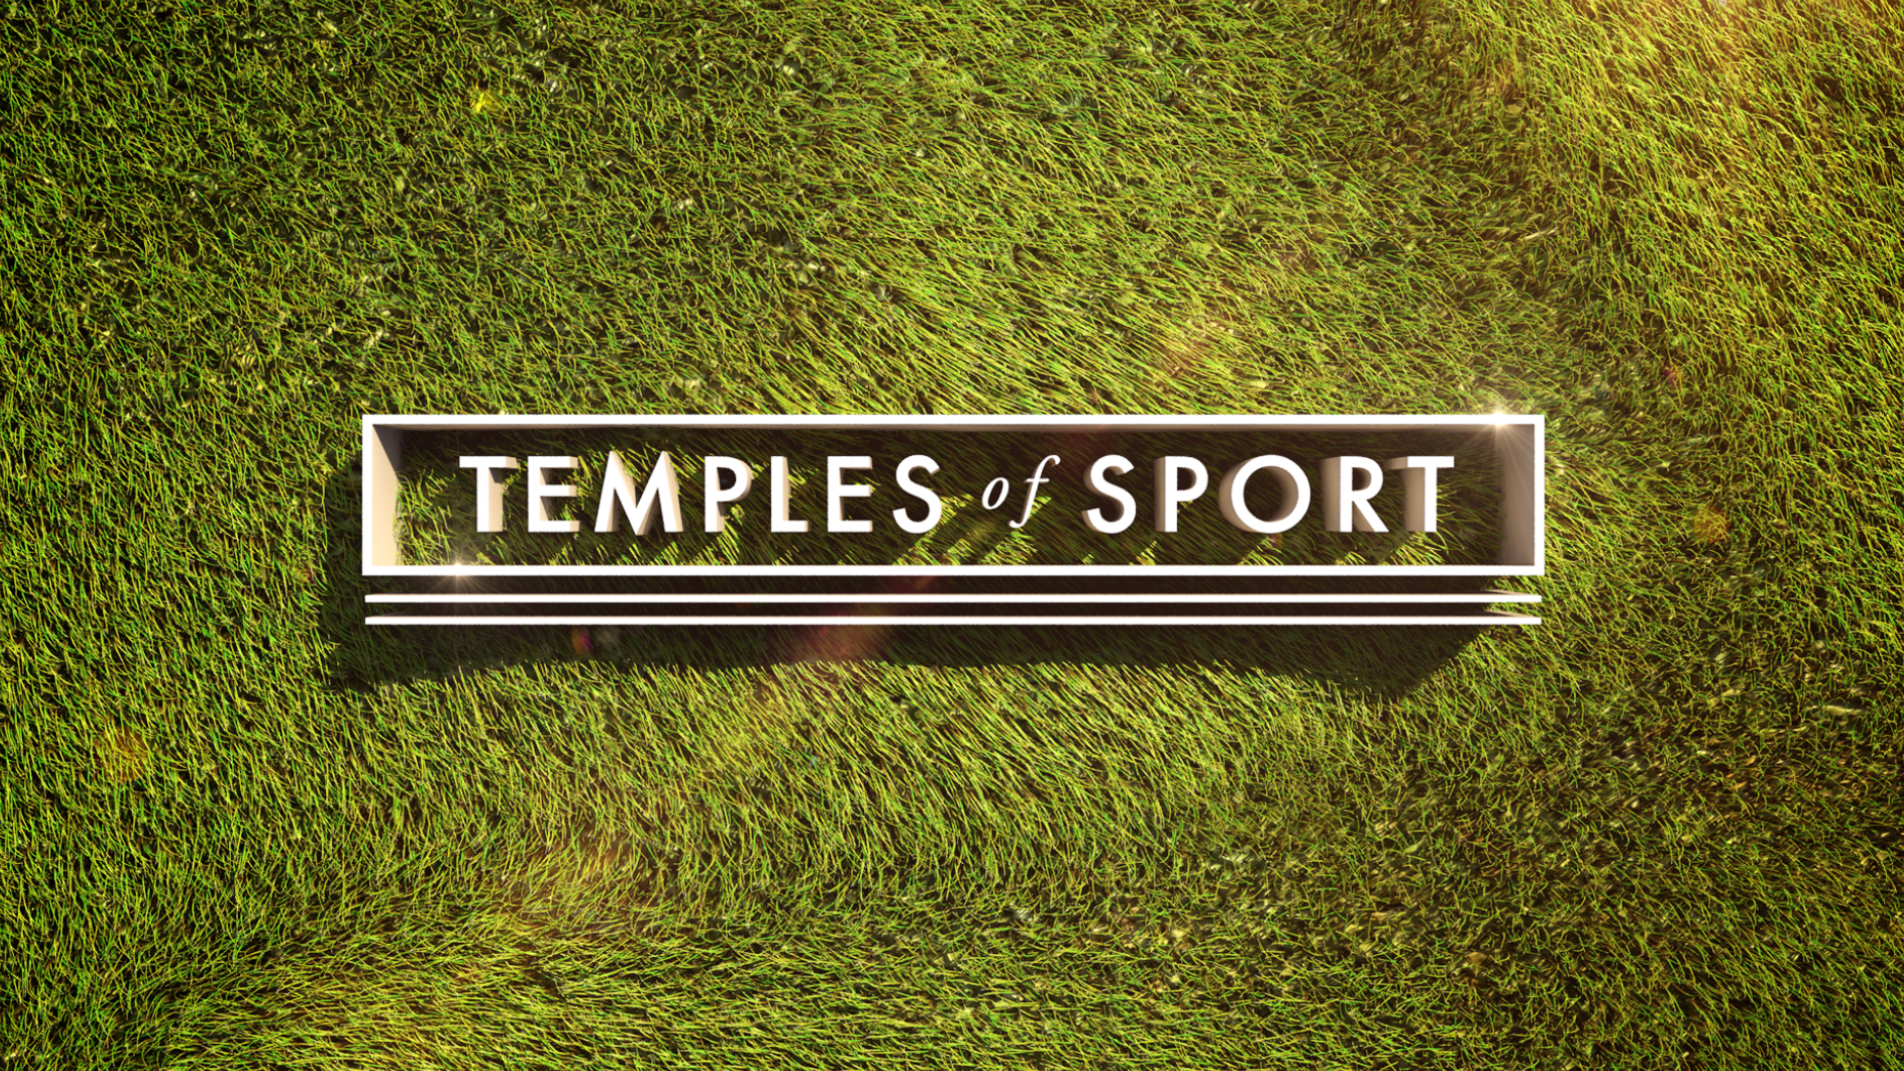 Temples of Sport